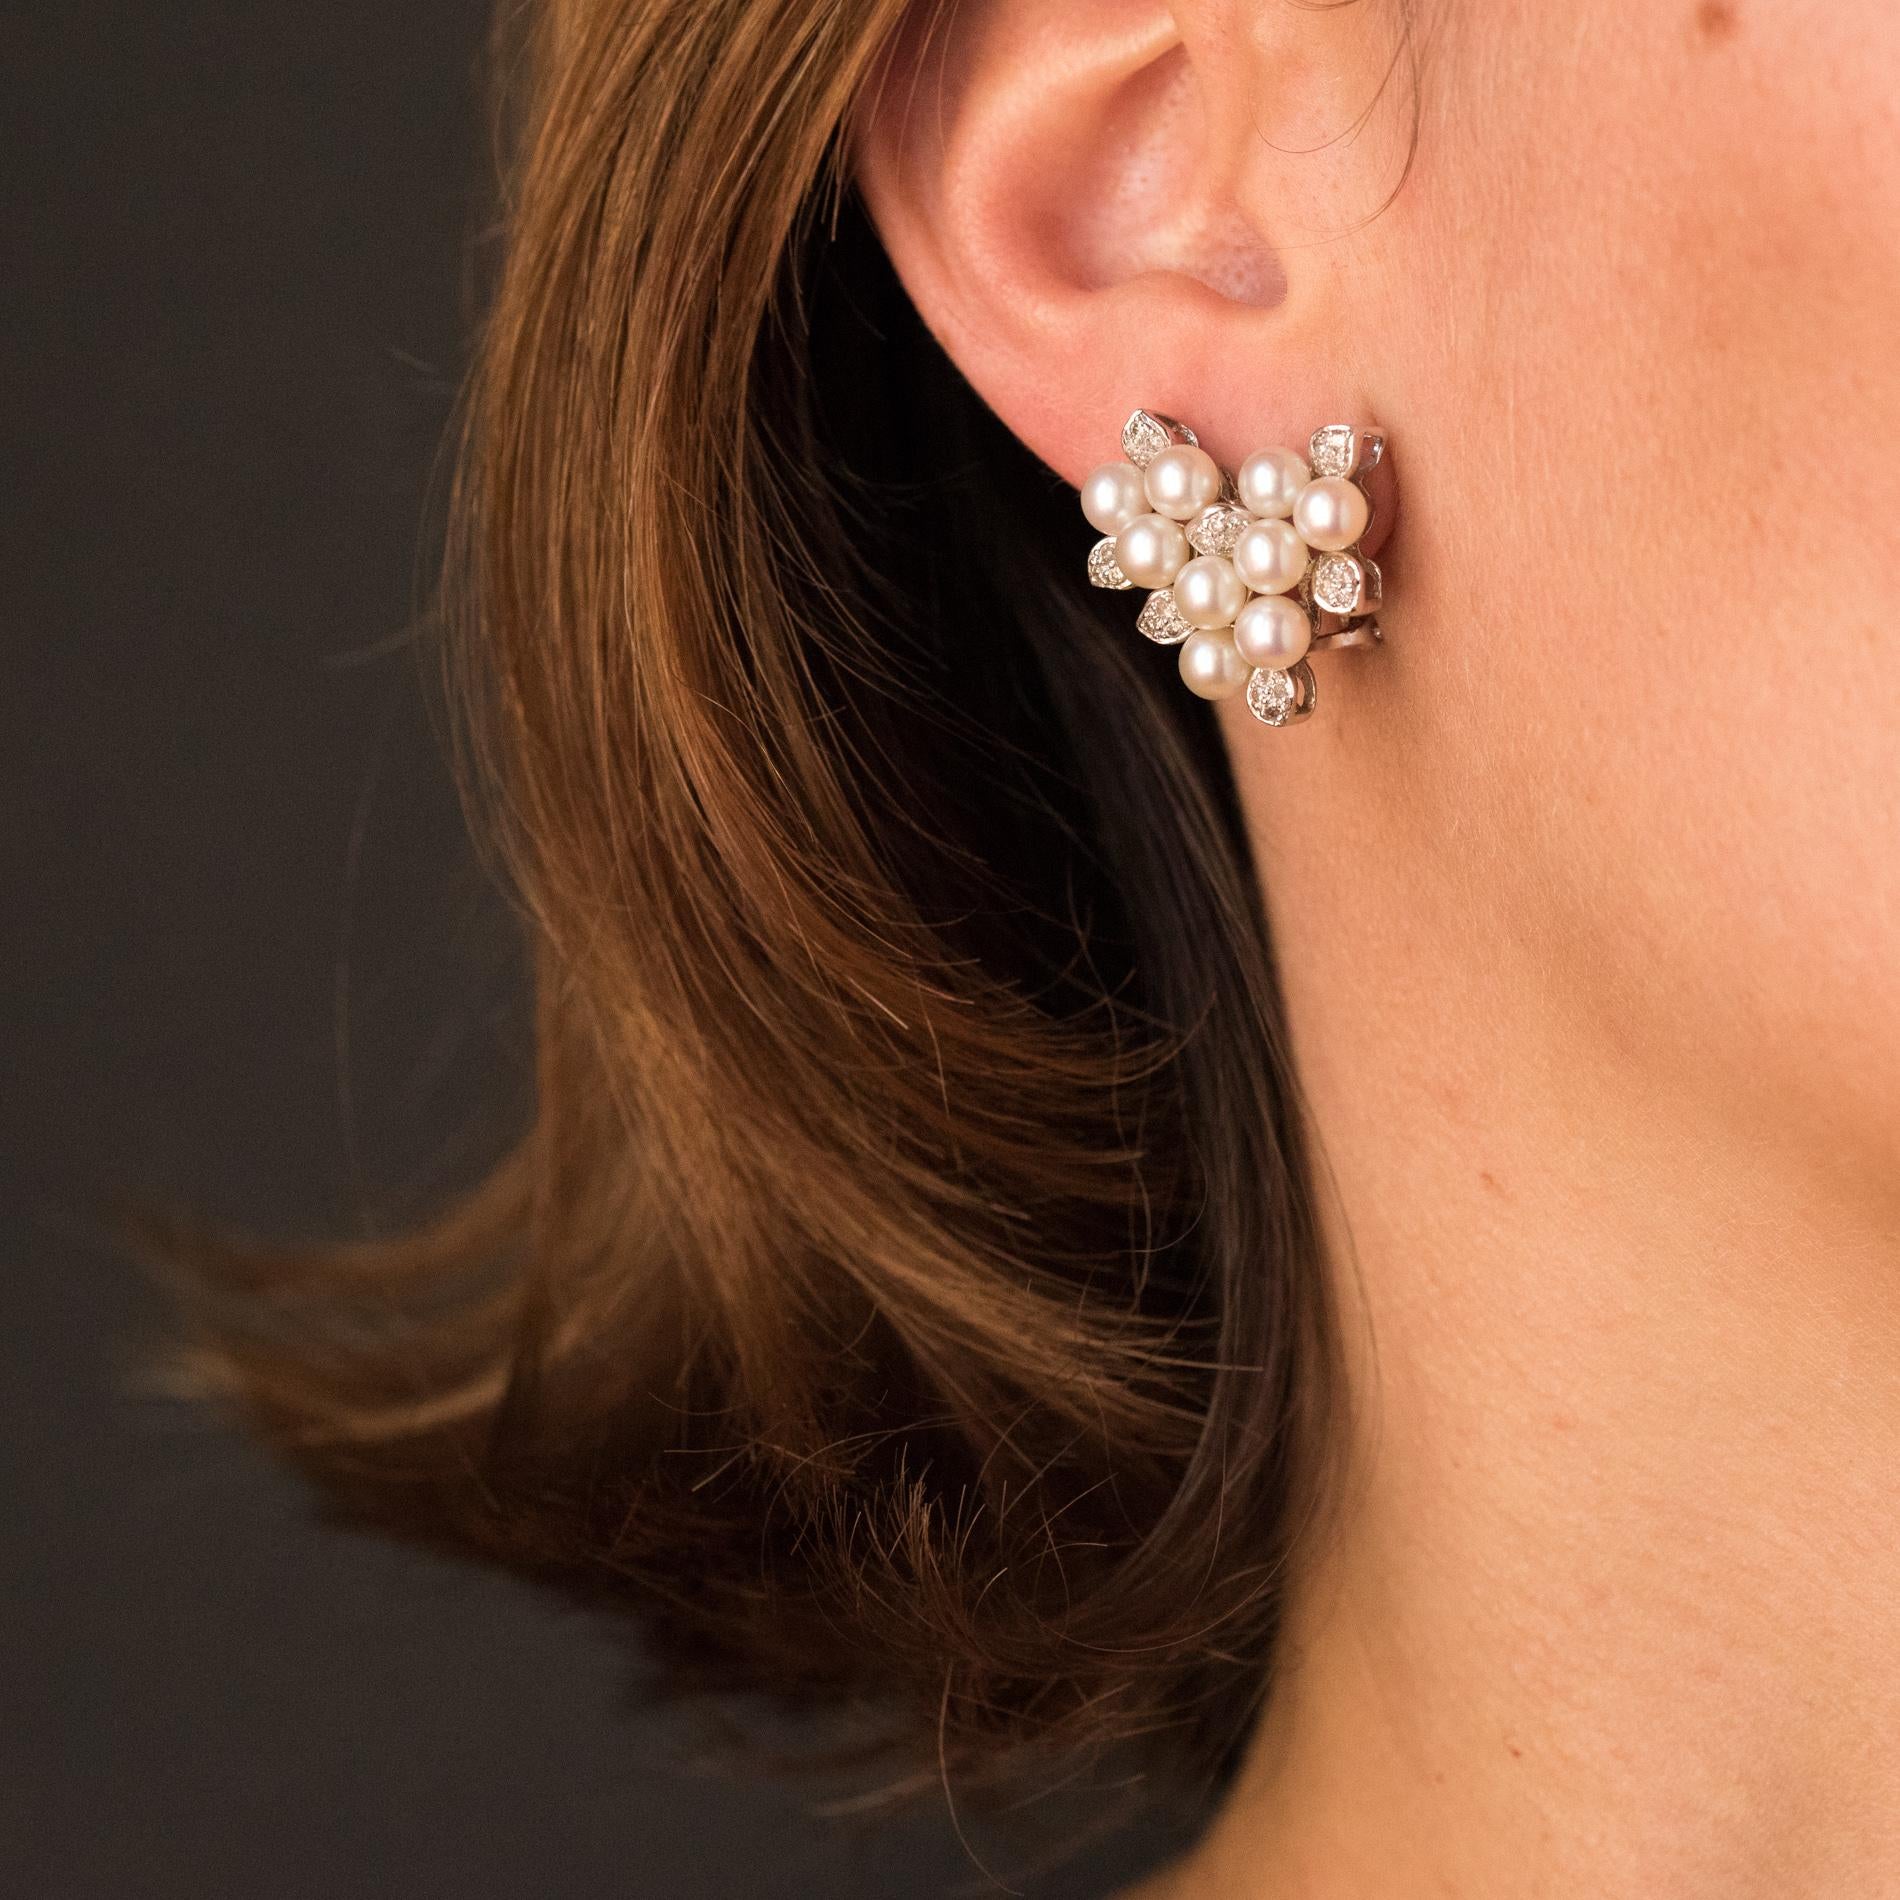 For pierced ears.
Earrings in 18 karat white gold, eagle head hallmark.
They form a cluster on which the grapes are cultured pearls and the leaves are diamonds set with claws. The clasp is a nail with safety clip.
Total weight of diamonds : 0.50